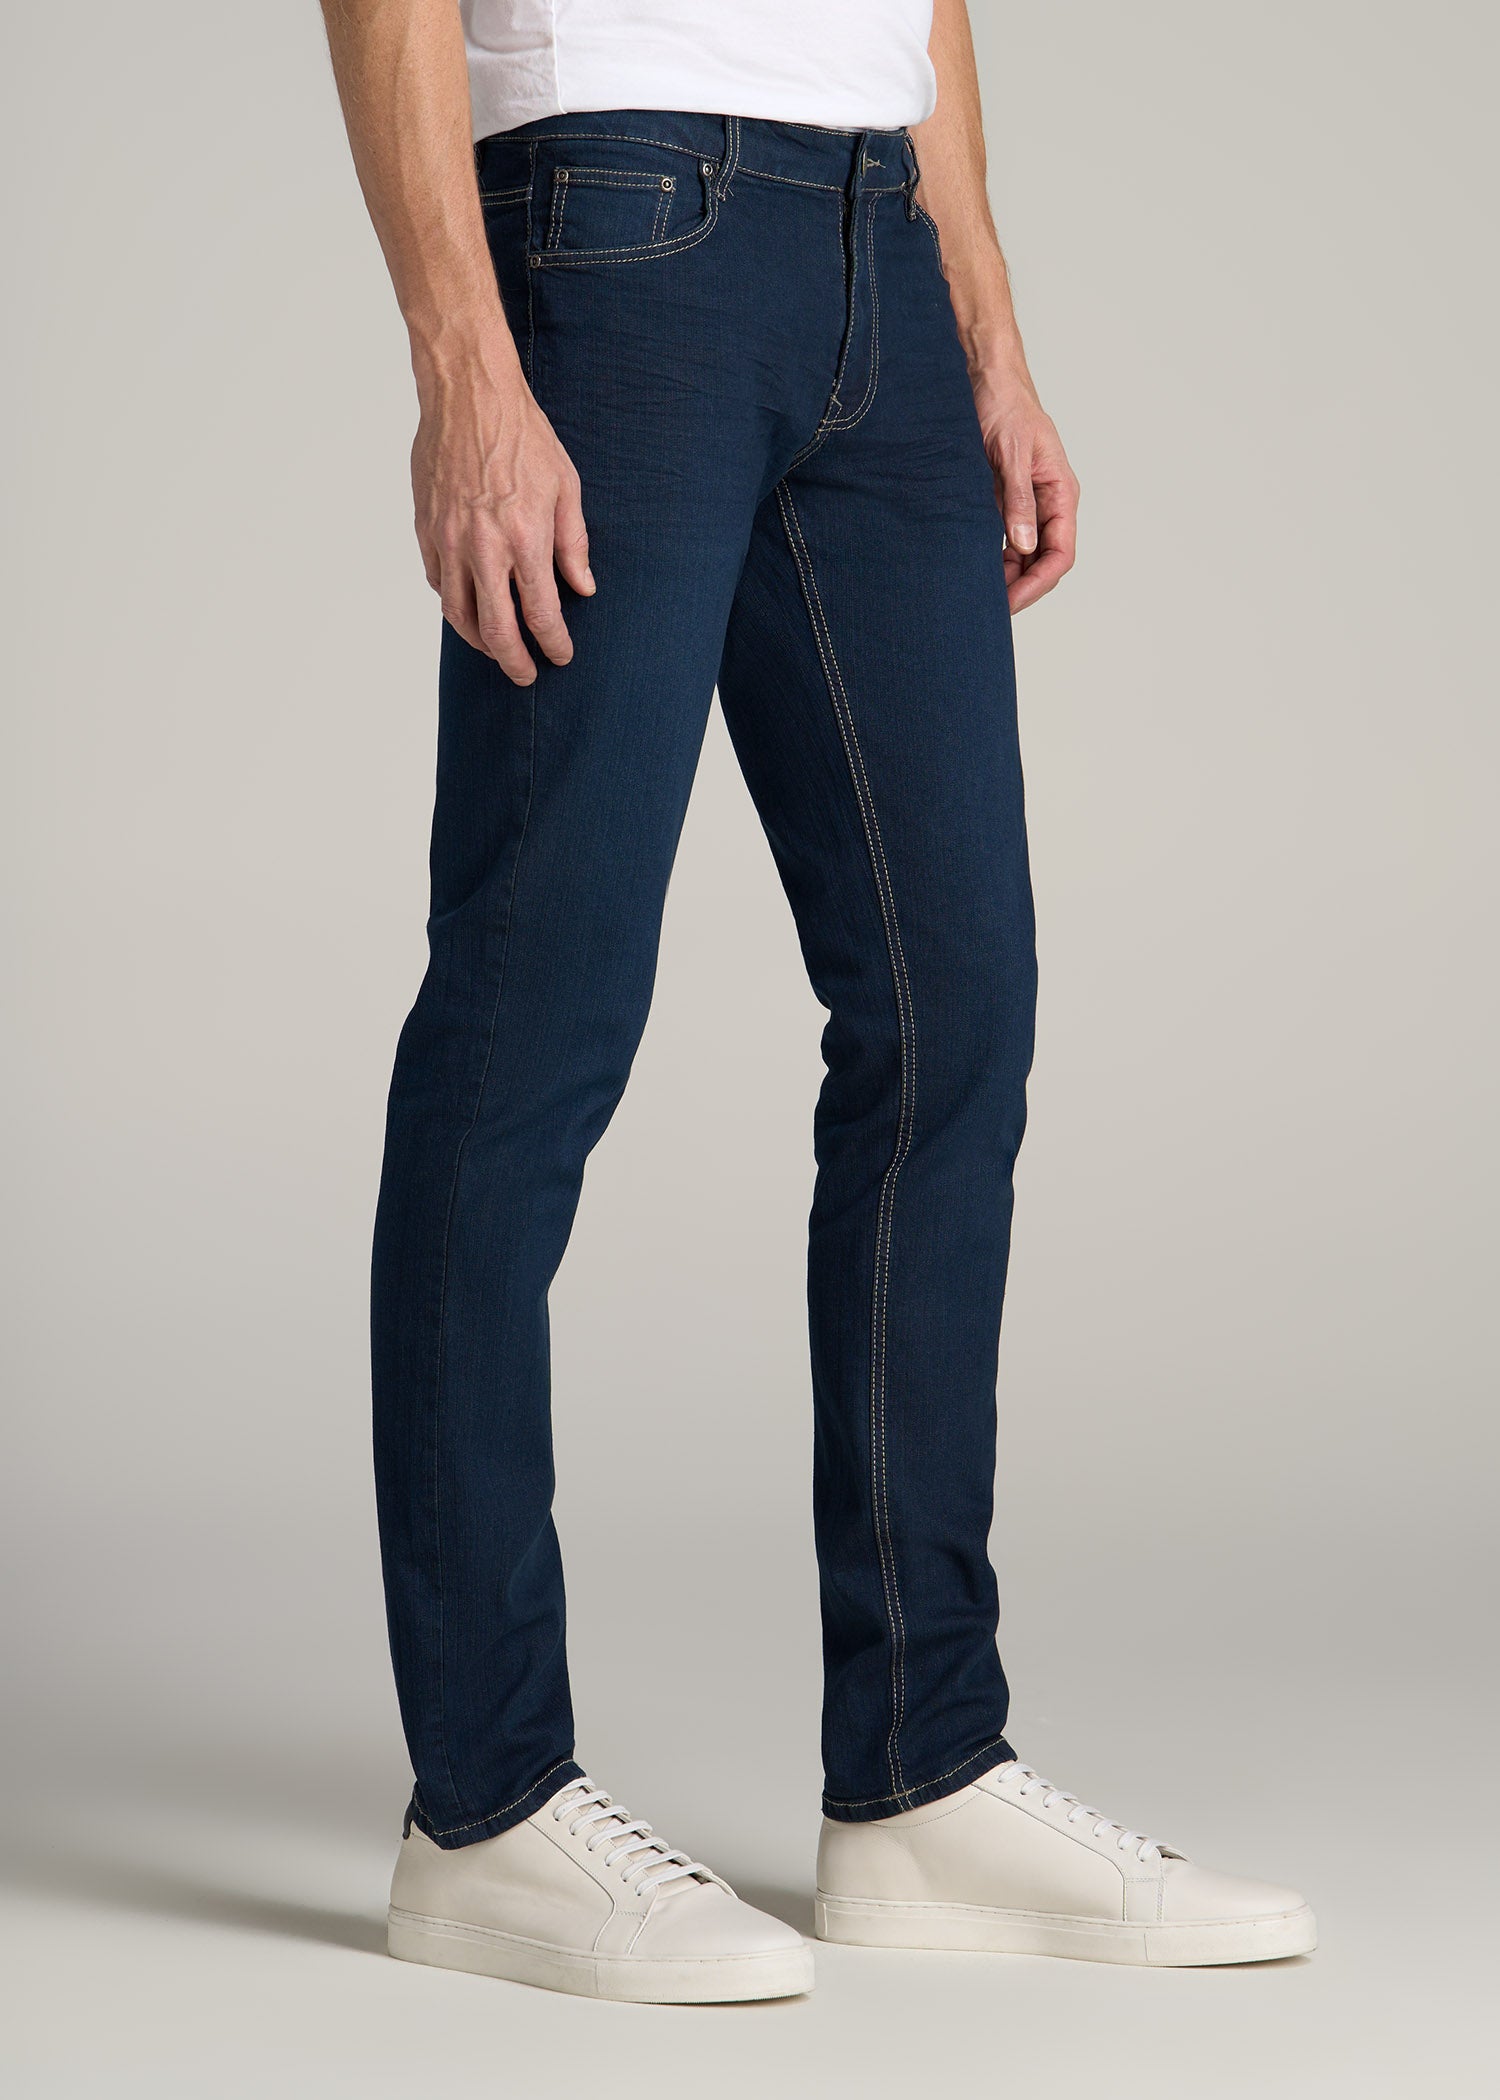 For | Tall Carman Jeans Tall American Men Blue-Steel Tapered